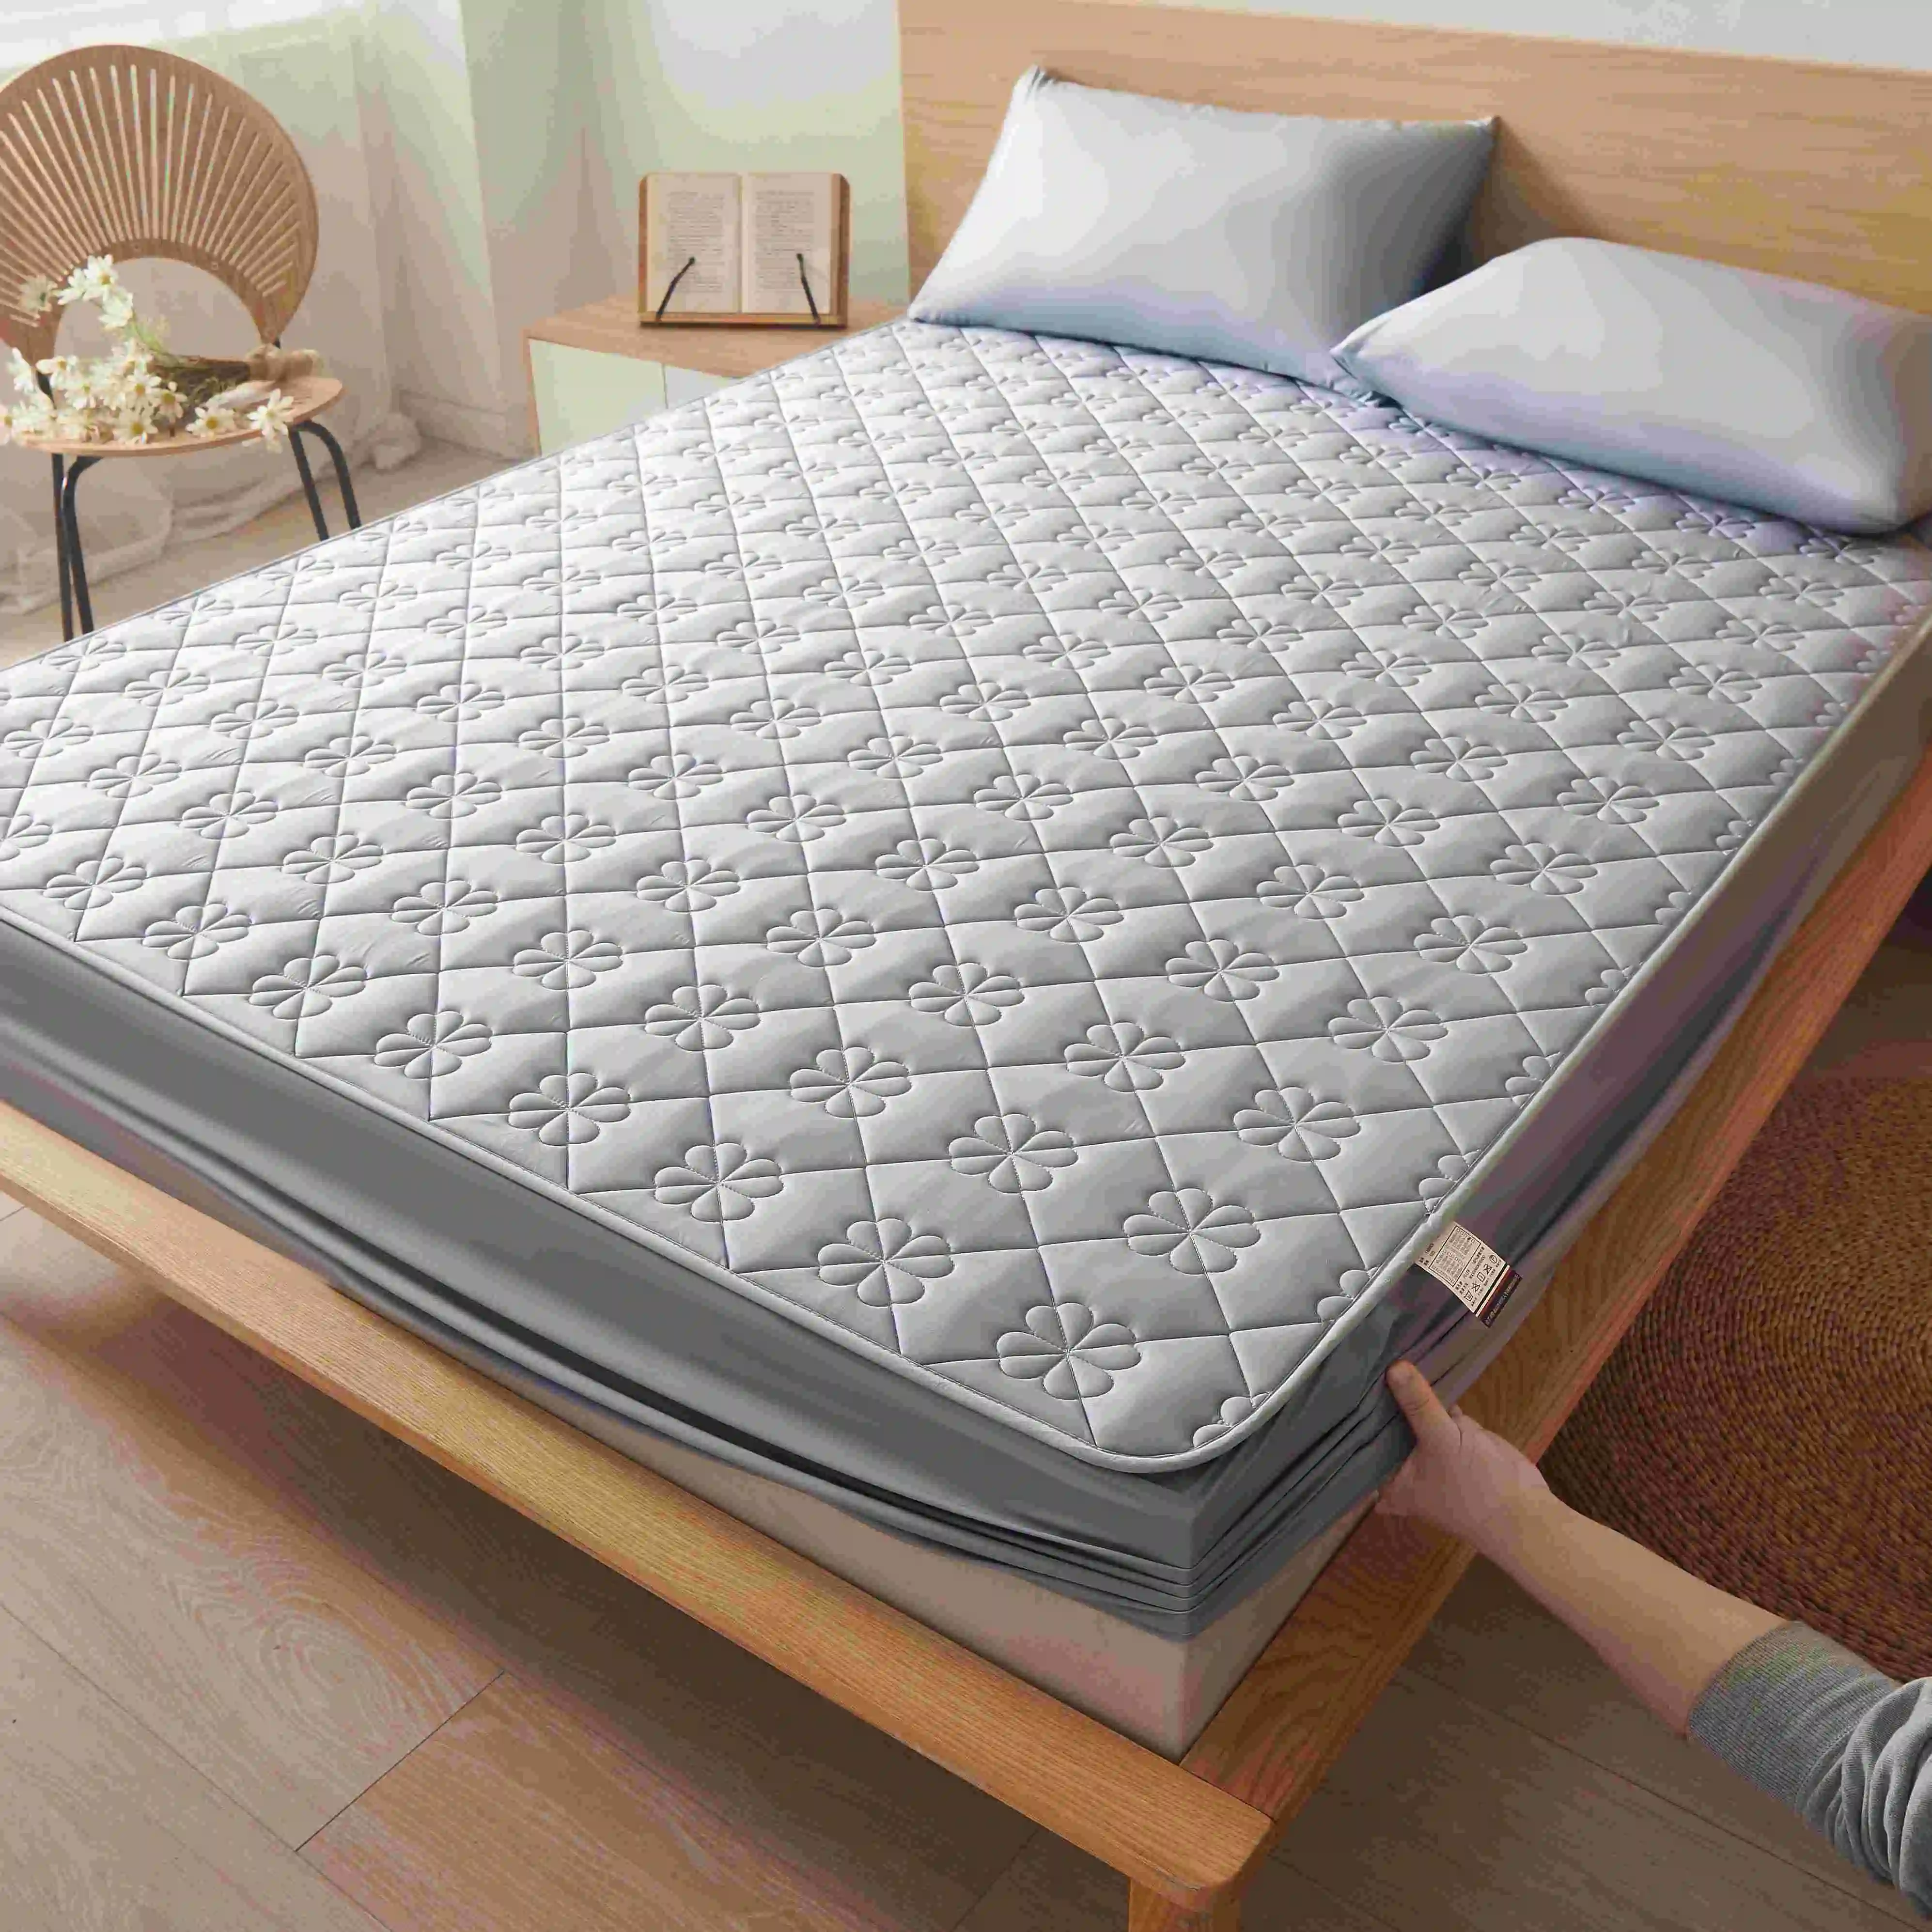 

Latex Thicken Quilted Mattress Cover King Queen Size Fitted Bed Sheet Antibacterial Bedspread Breathable Bed Cover for Home